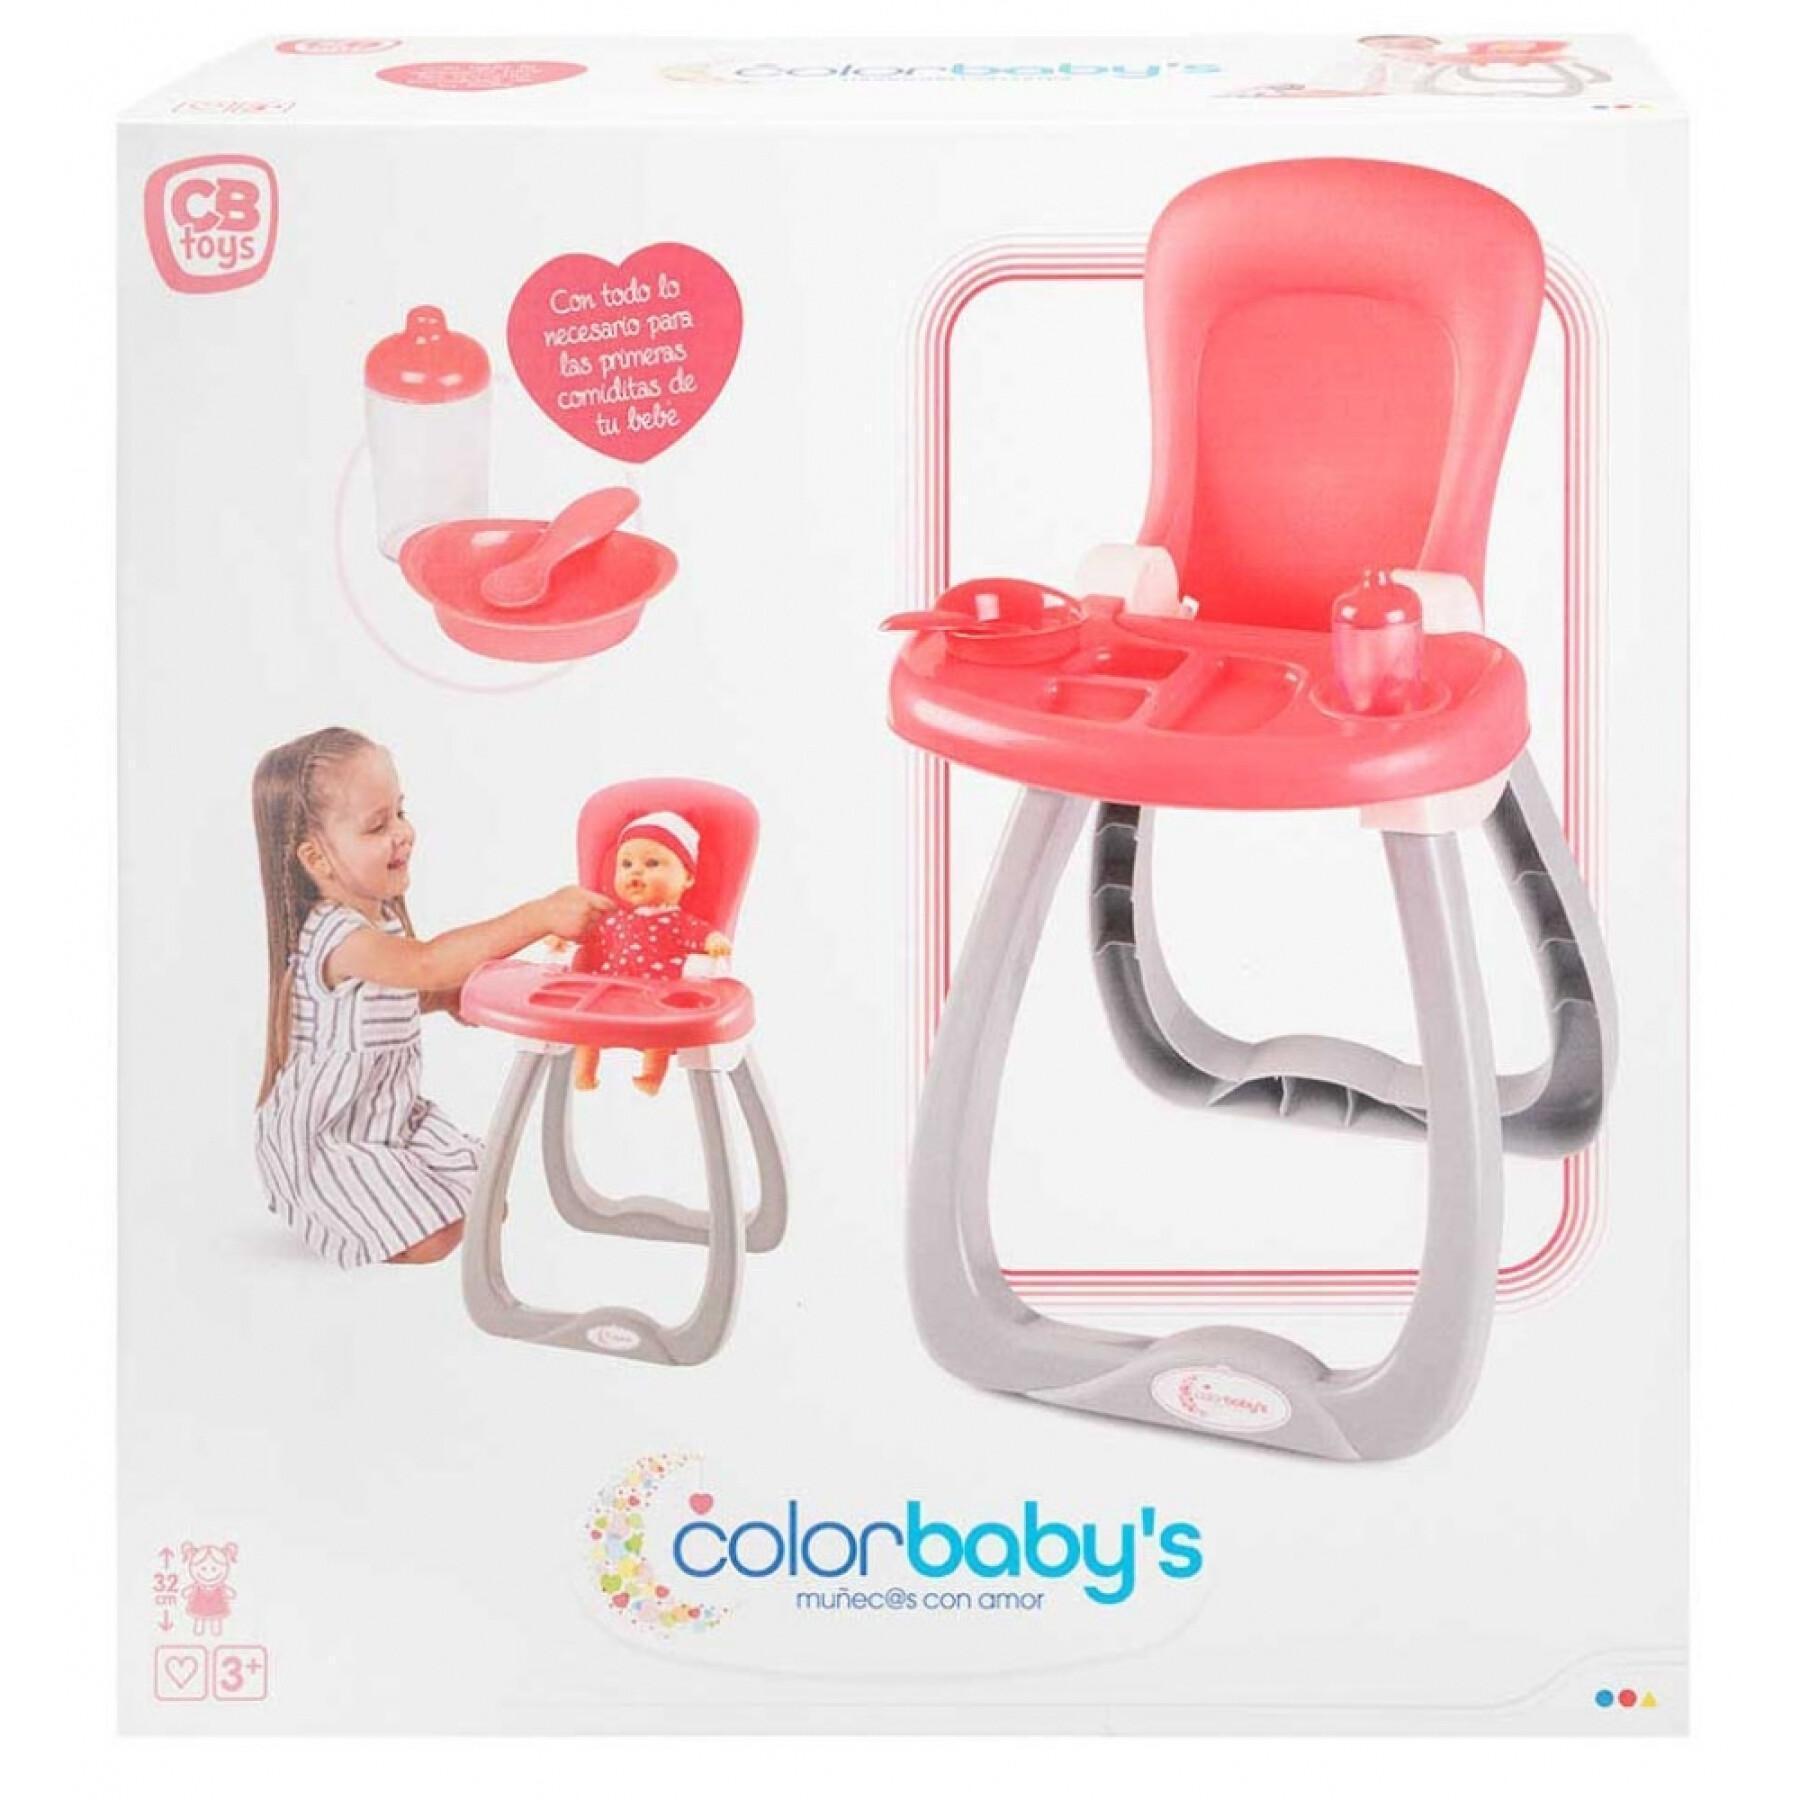 High chair for dolls with access CB Toys